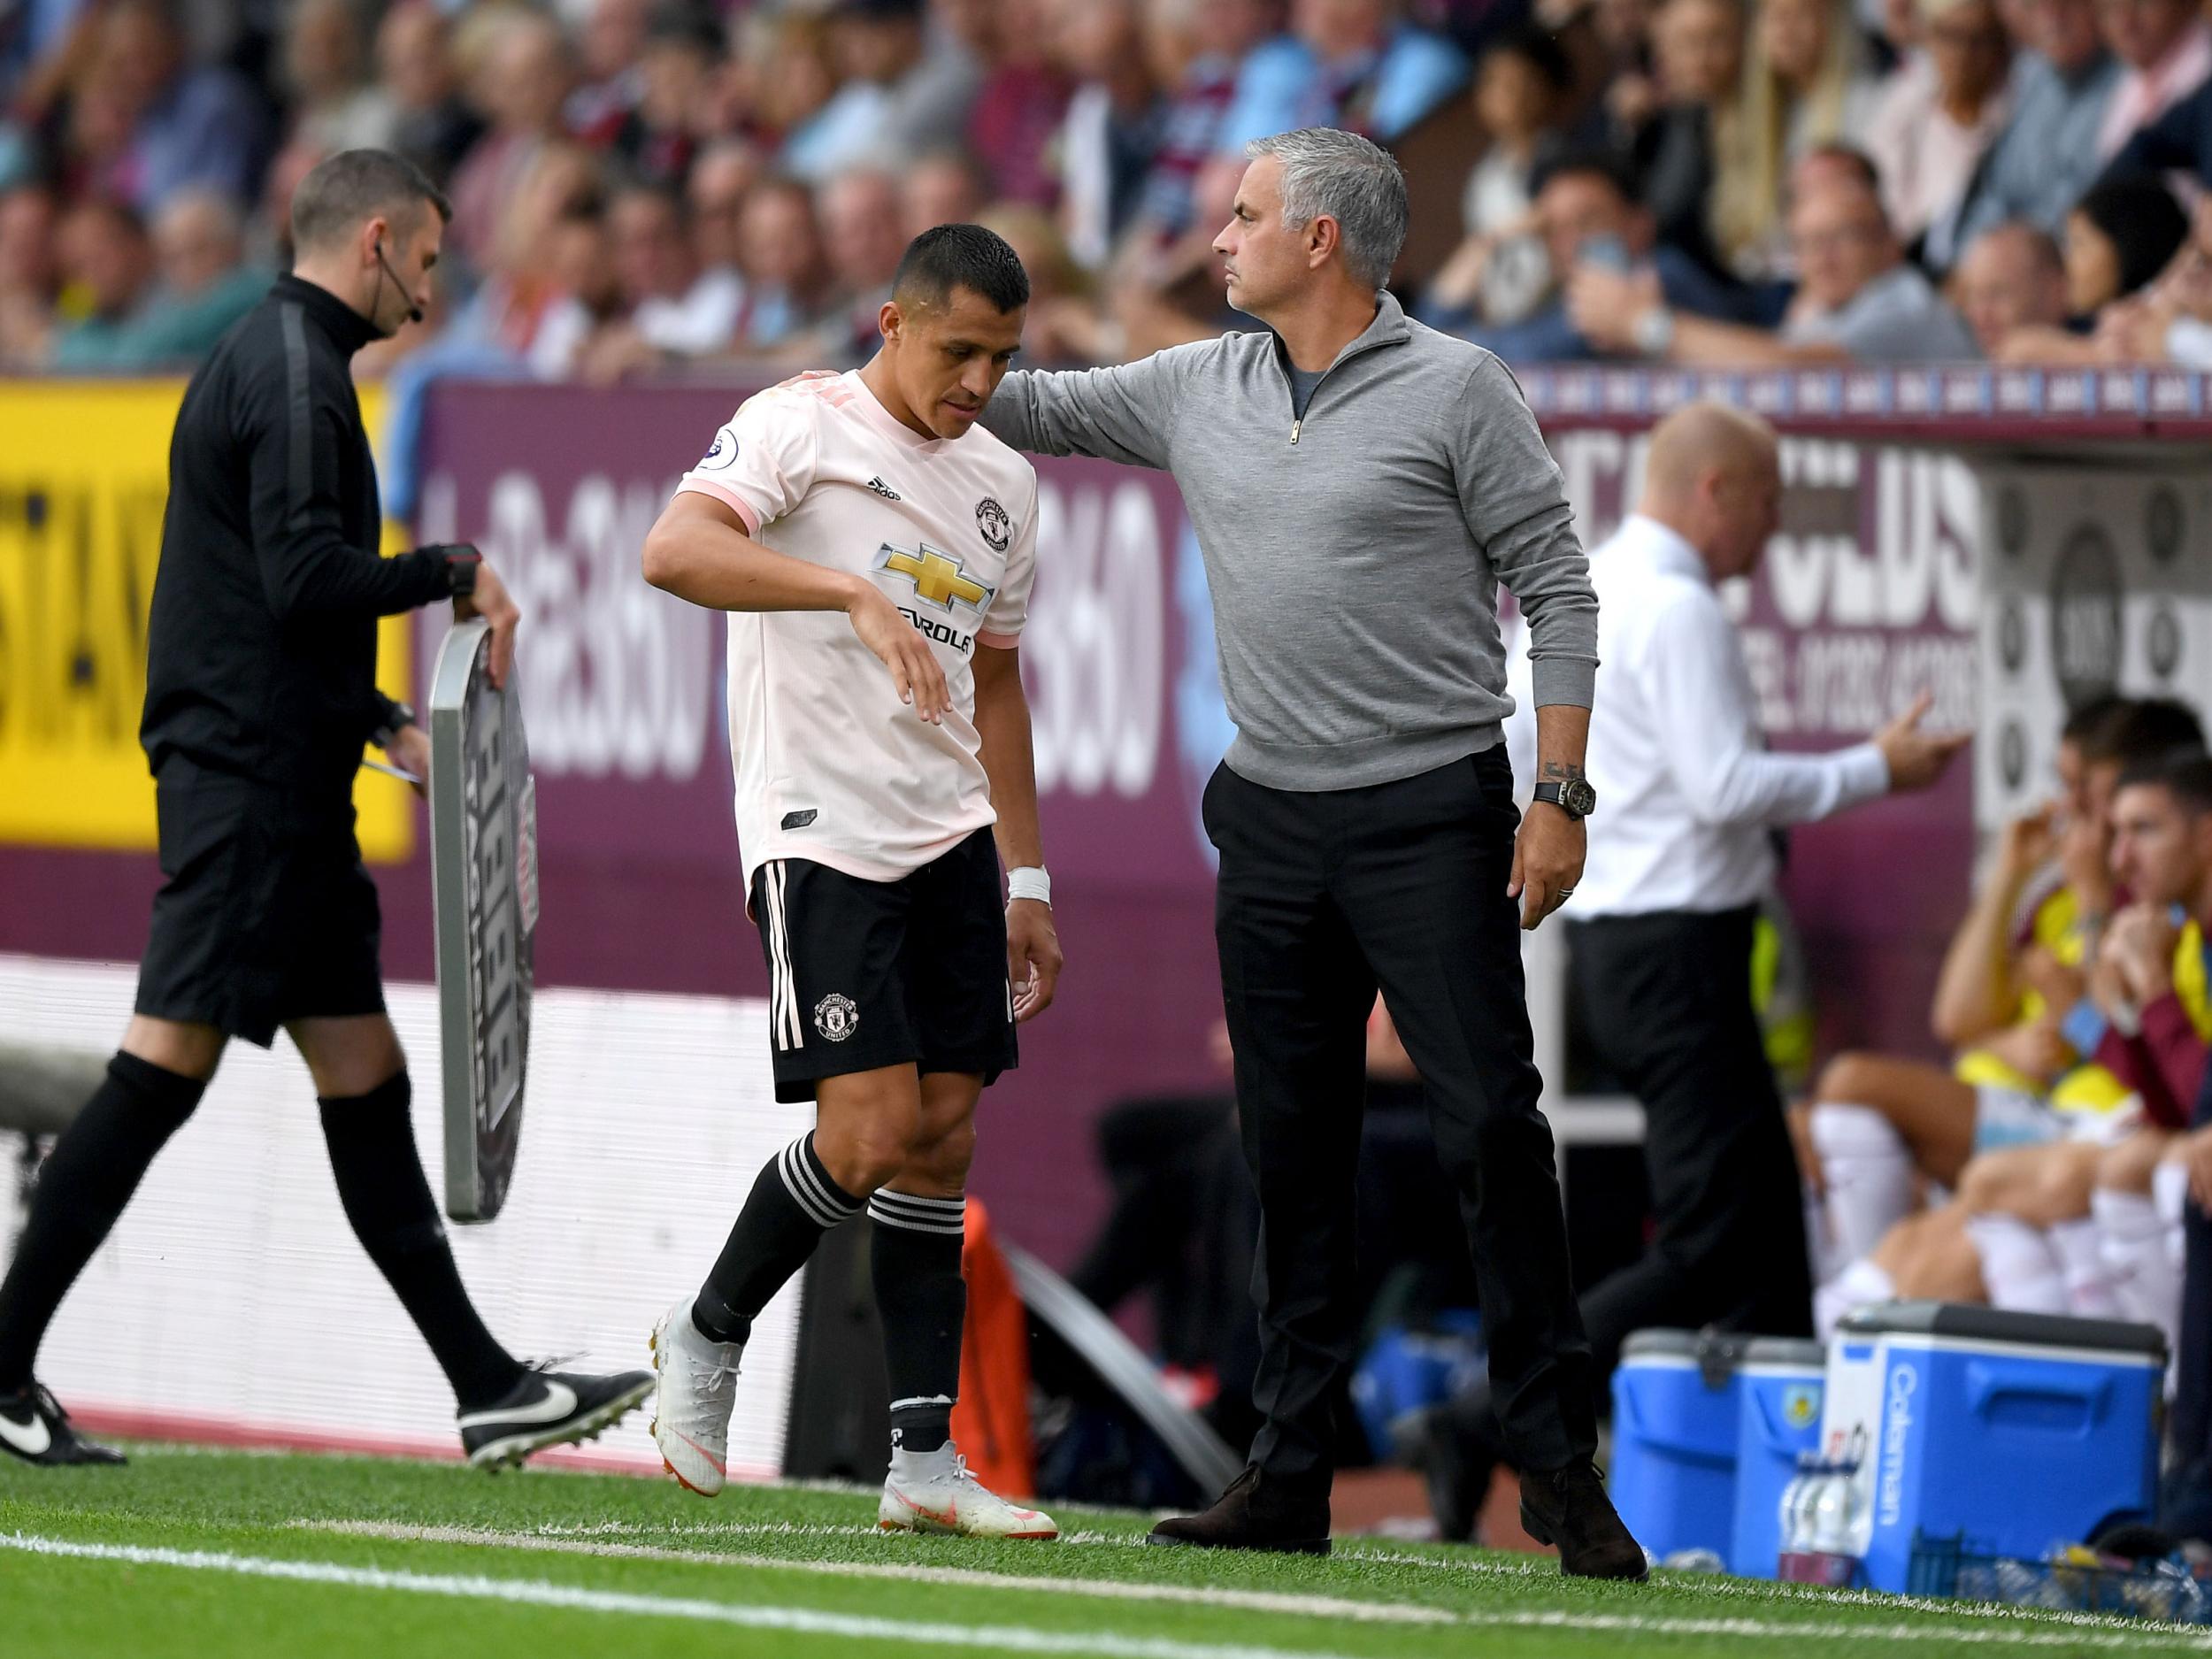 Jose Mourinho feels he did not get the best out of a "sad" Alexis Sanchez